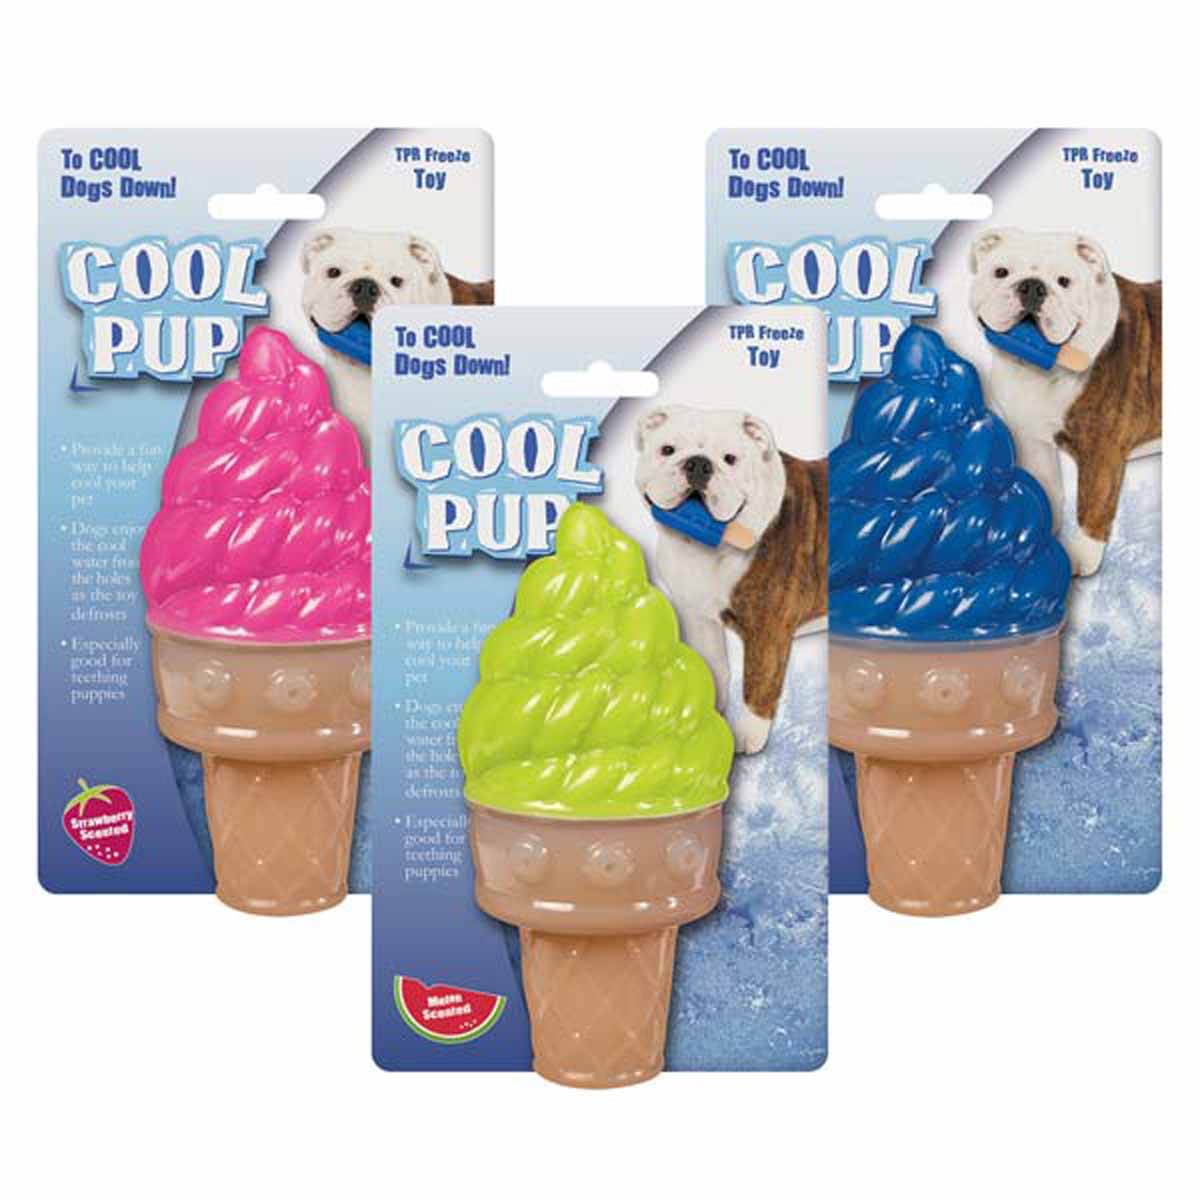 https://images.baxterboo.com/global/images/products/large/cool-pup-cooling-dog-toy-ice-cream-cone-2658.jpg